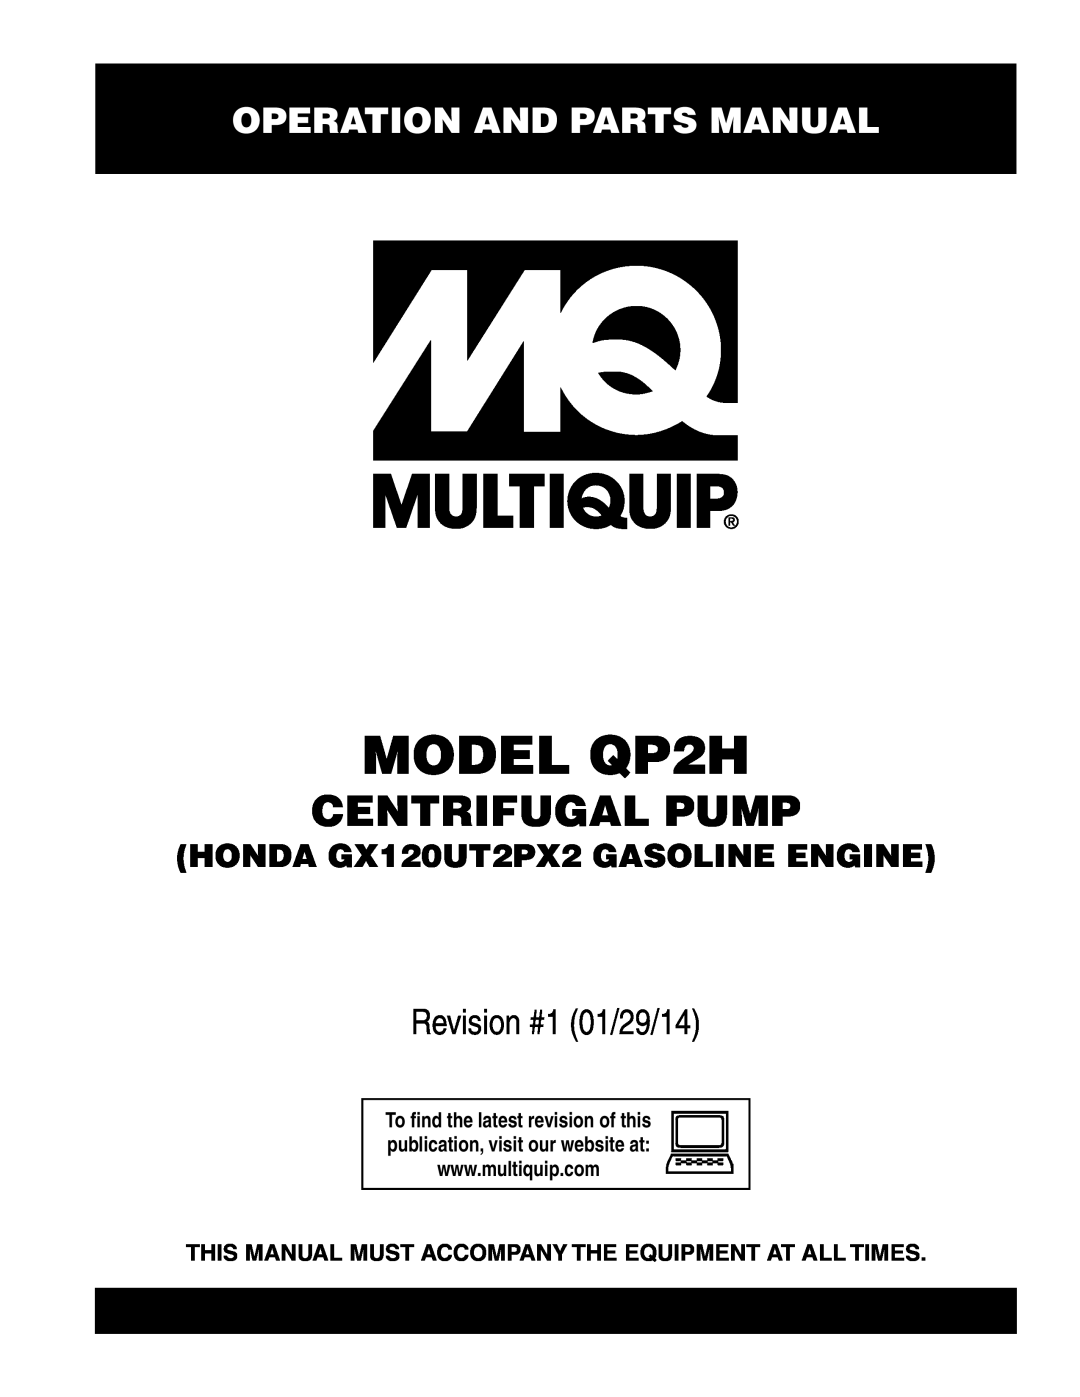 Multiquip manual Operation And Parts Manual, MODEL QP2H, Centrifugal Pump, Revision #1 01/29/14 